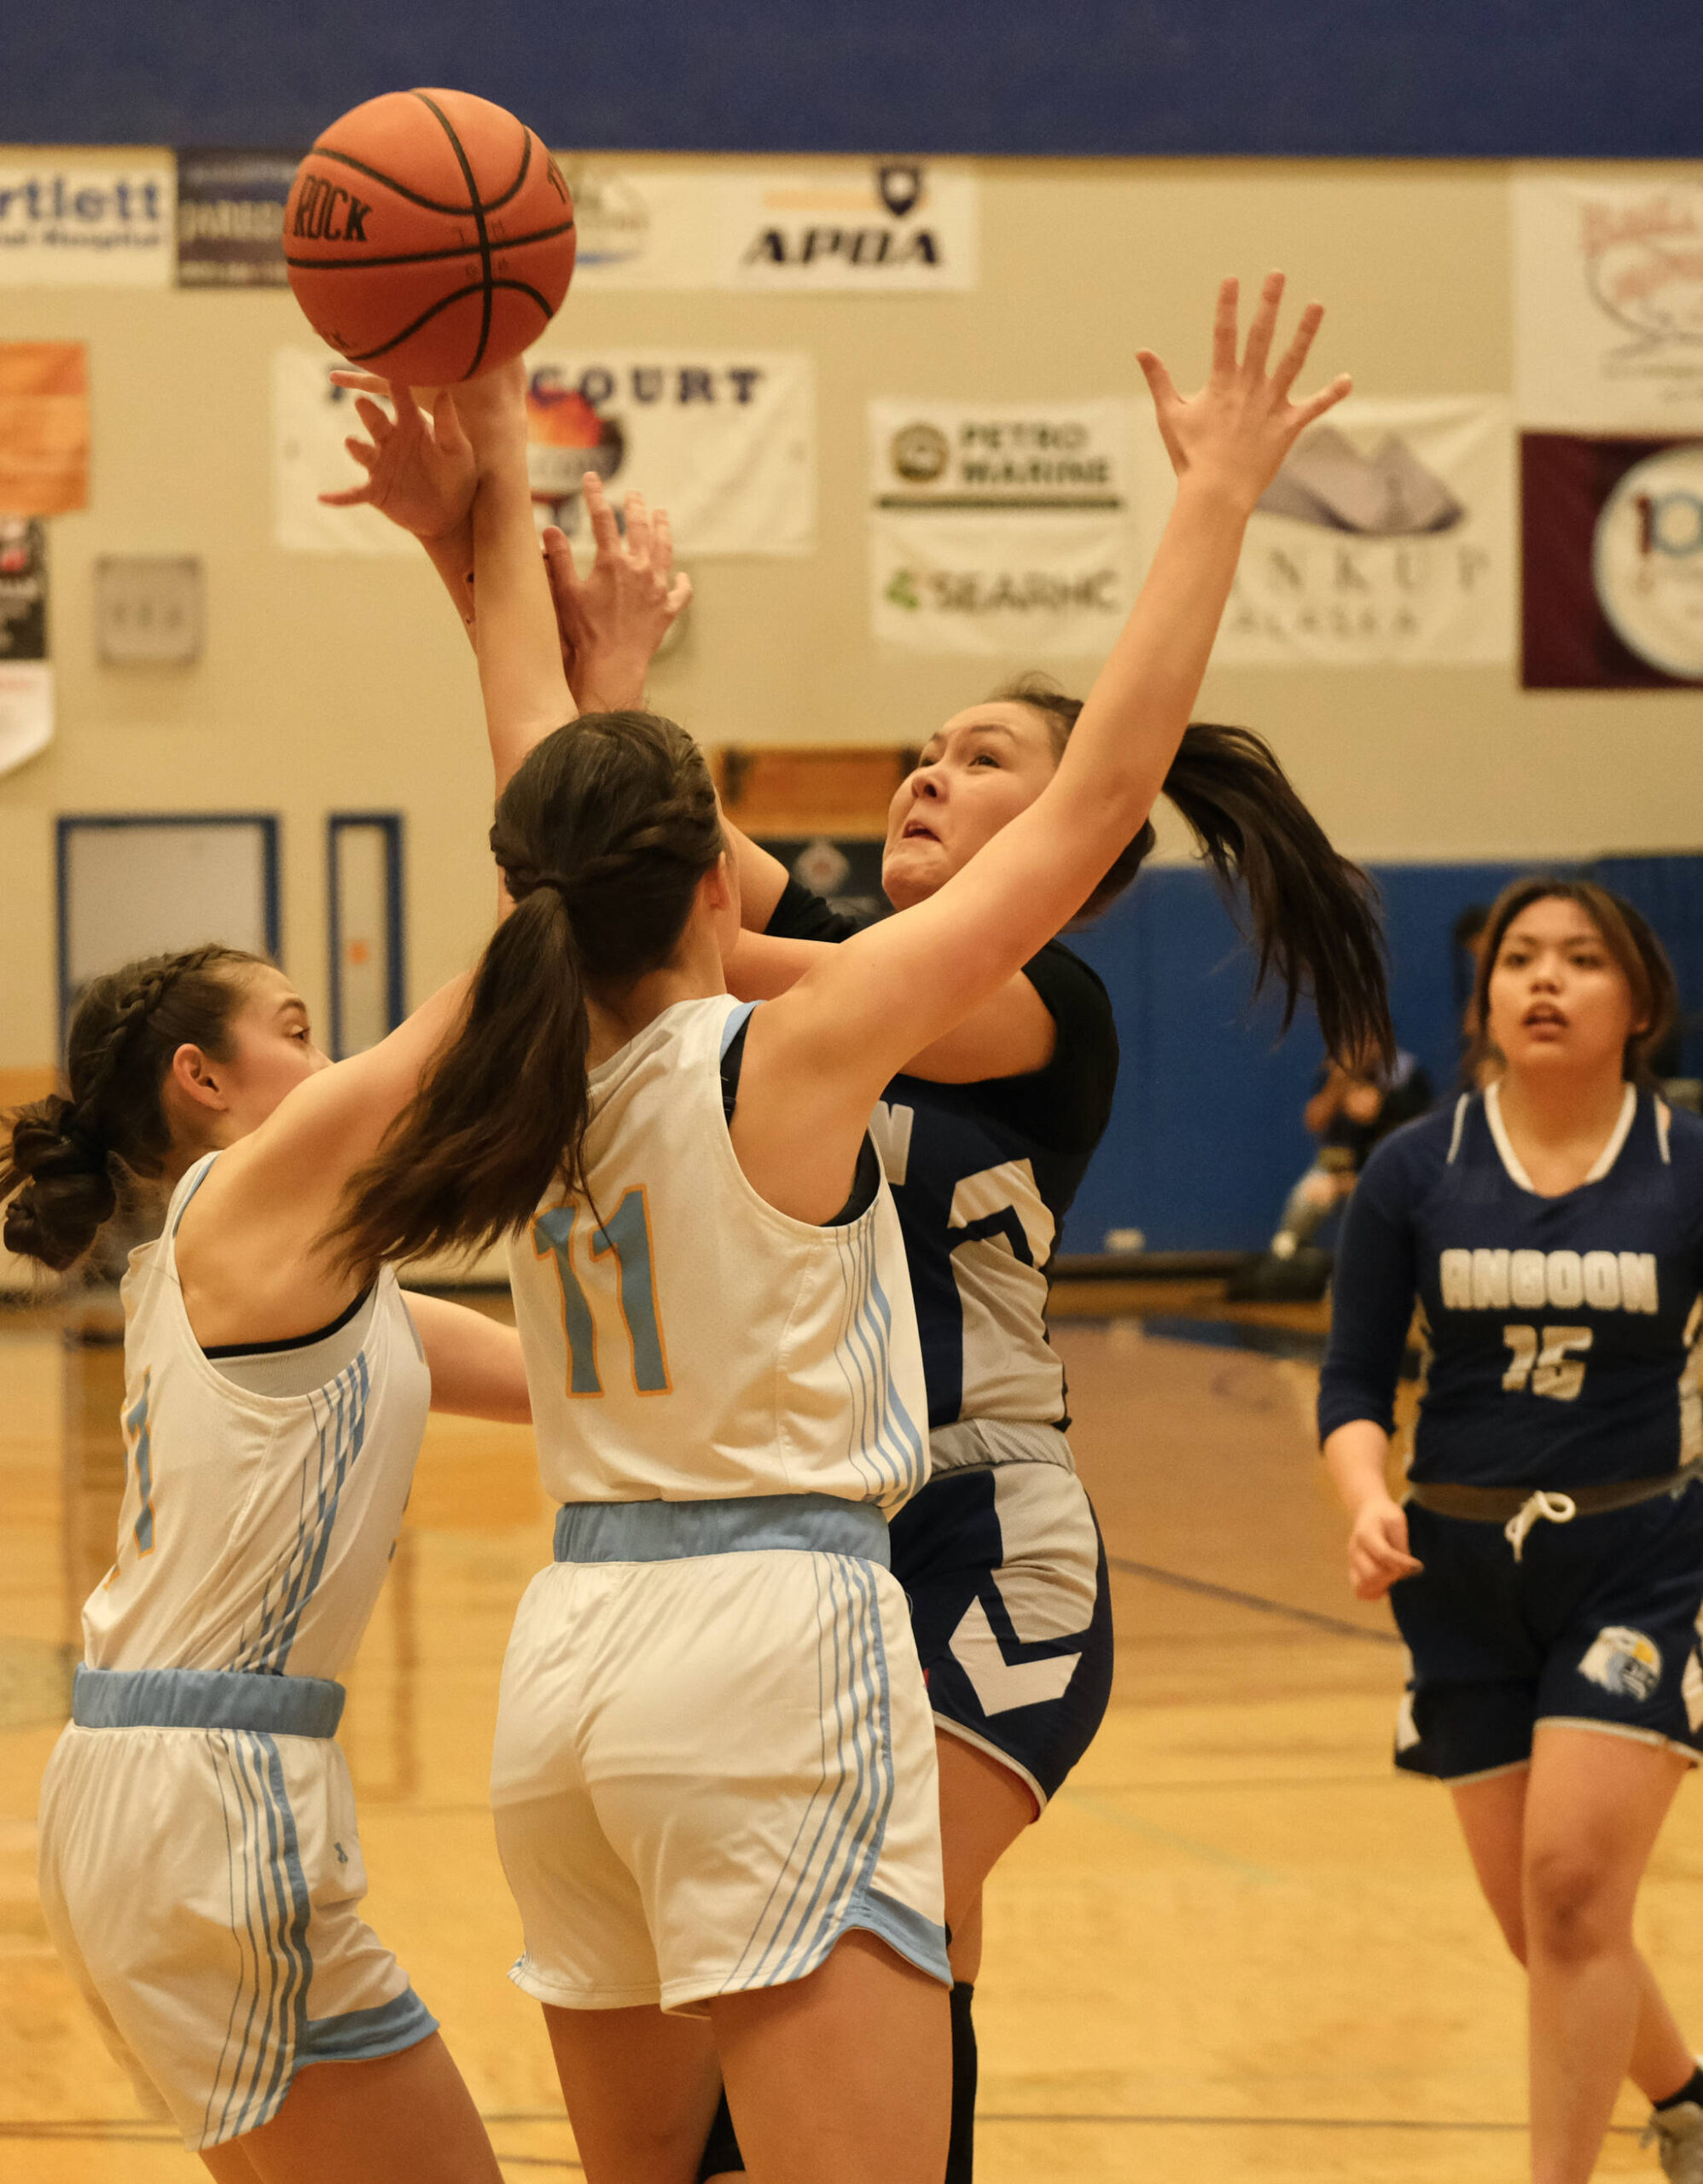 Angoon’s Faith Ramey is fouled on a shot by Dillingham’s Kalin Clouse (11) during the Elizabeth Peratrovich Women’s High School Basketball Invitational Tournament on Thursday at Thunder Mountain High School. The tournament runs through Saturday. (Klas Stolpe / For the Juneau Empire)